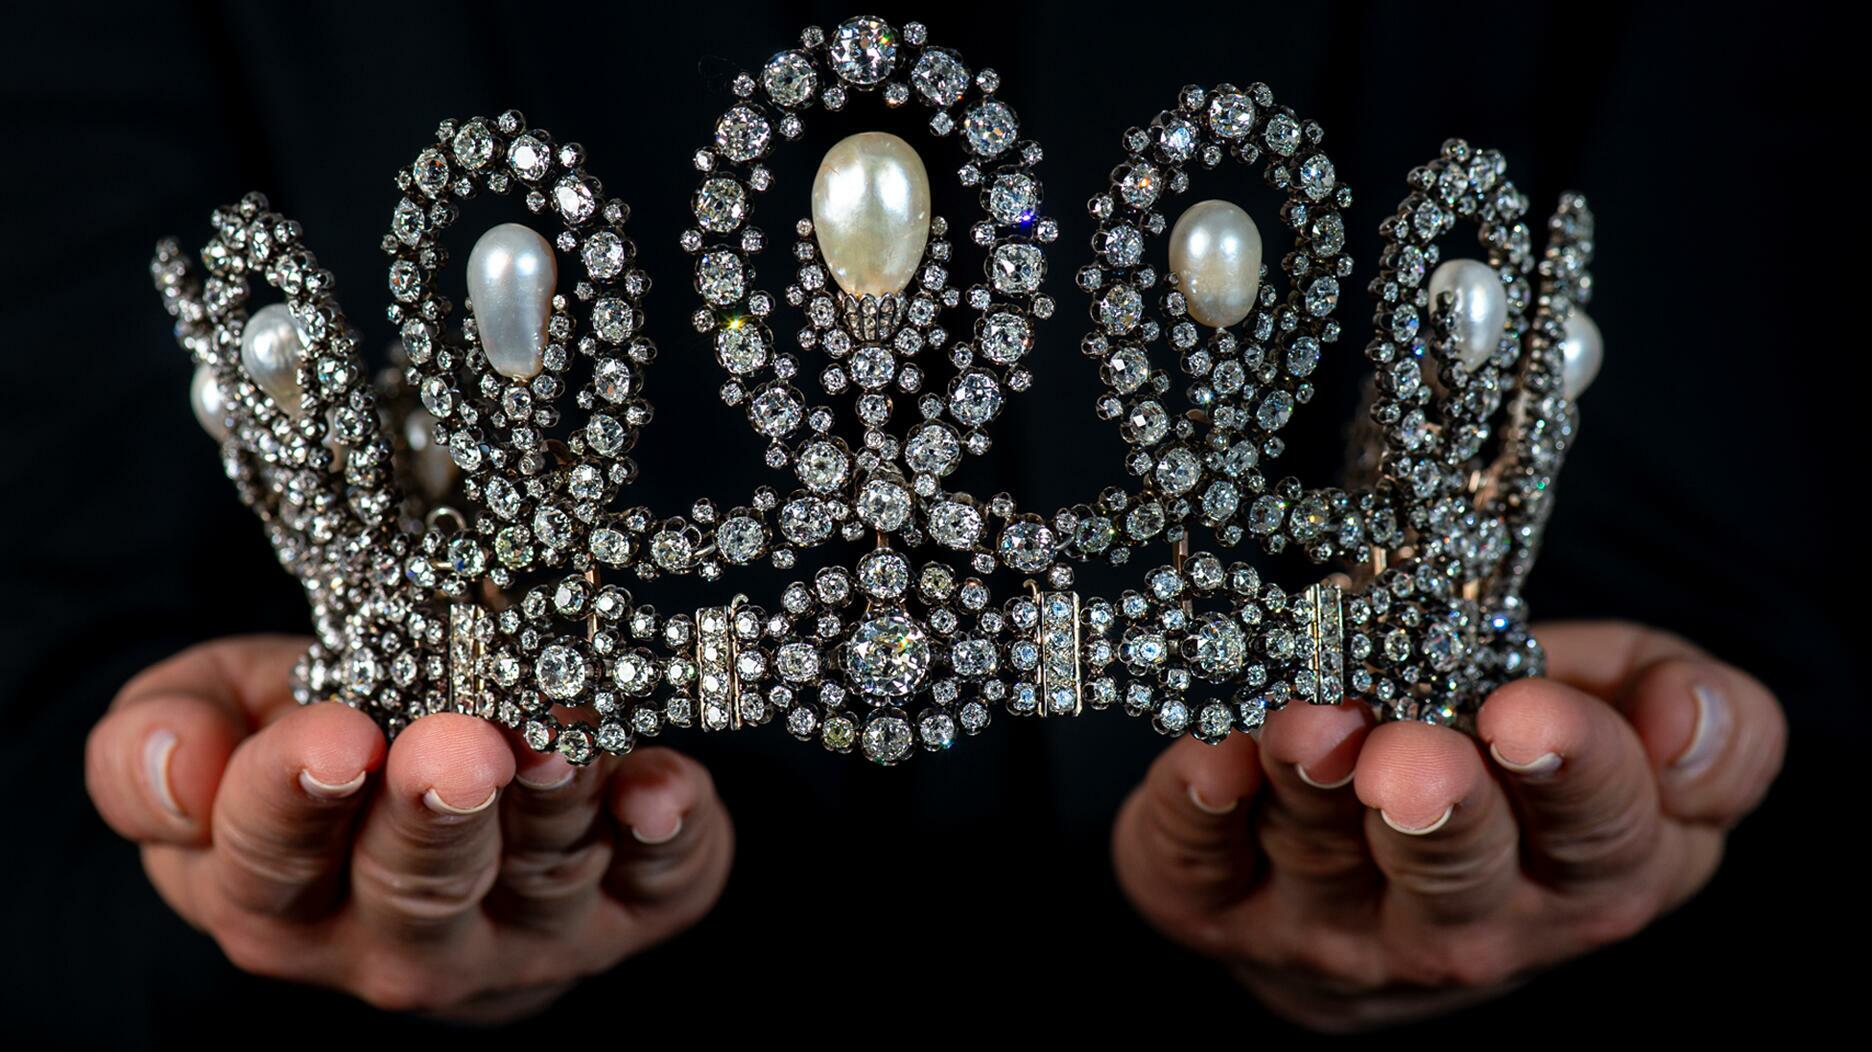 The Royal Tiara ‘tried On By Thousands Sells For 16m National Jeweler